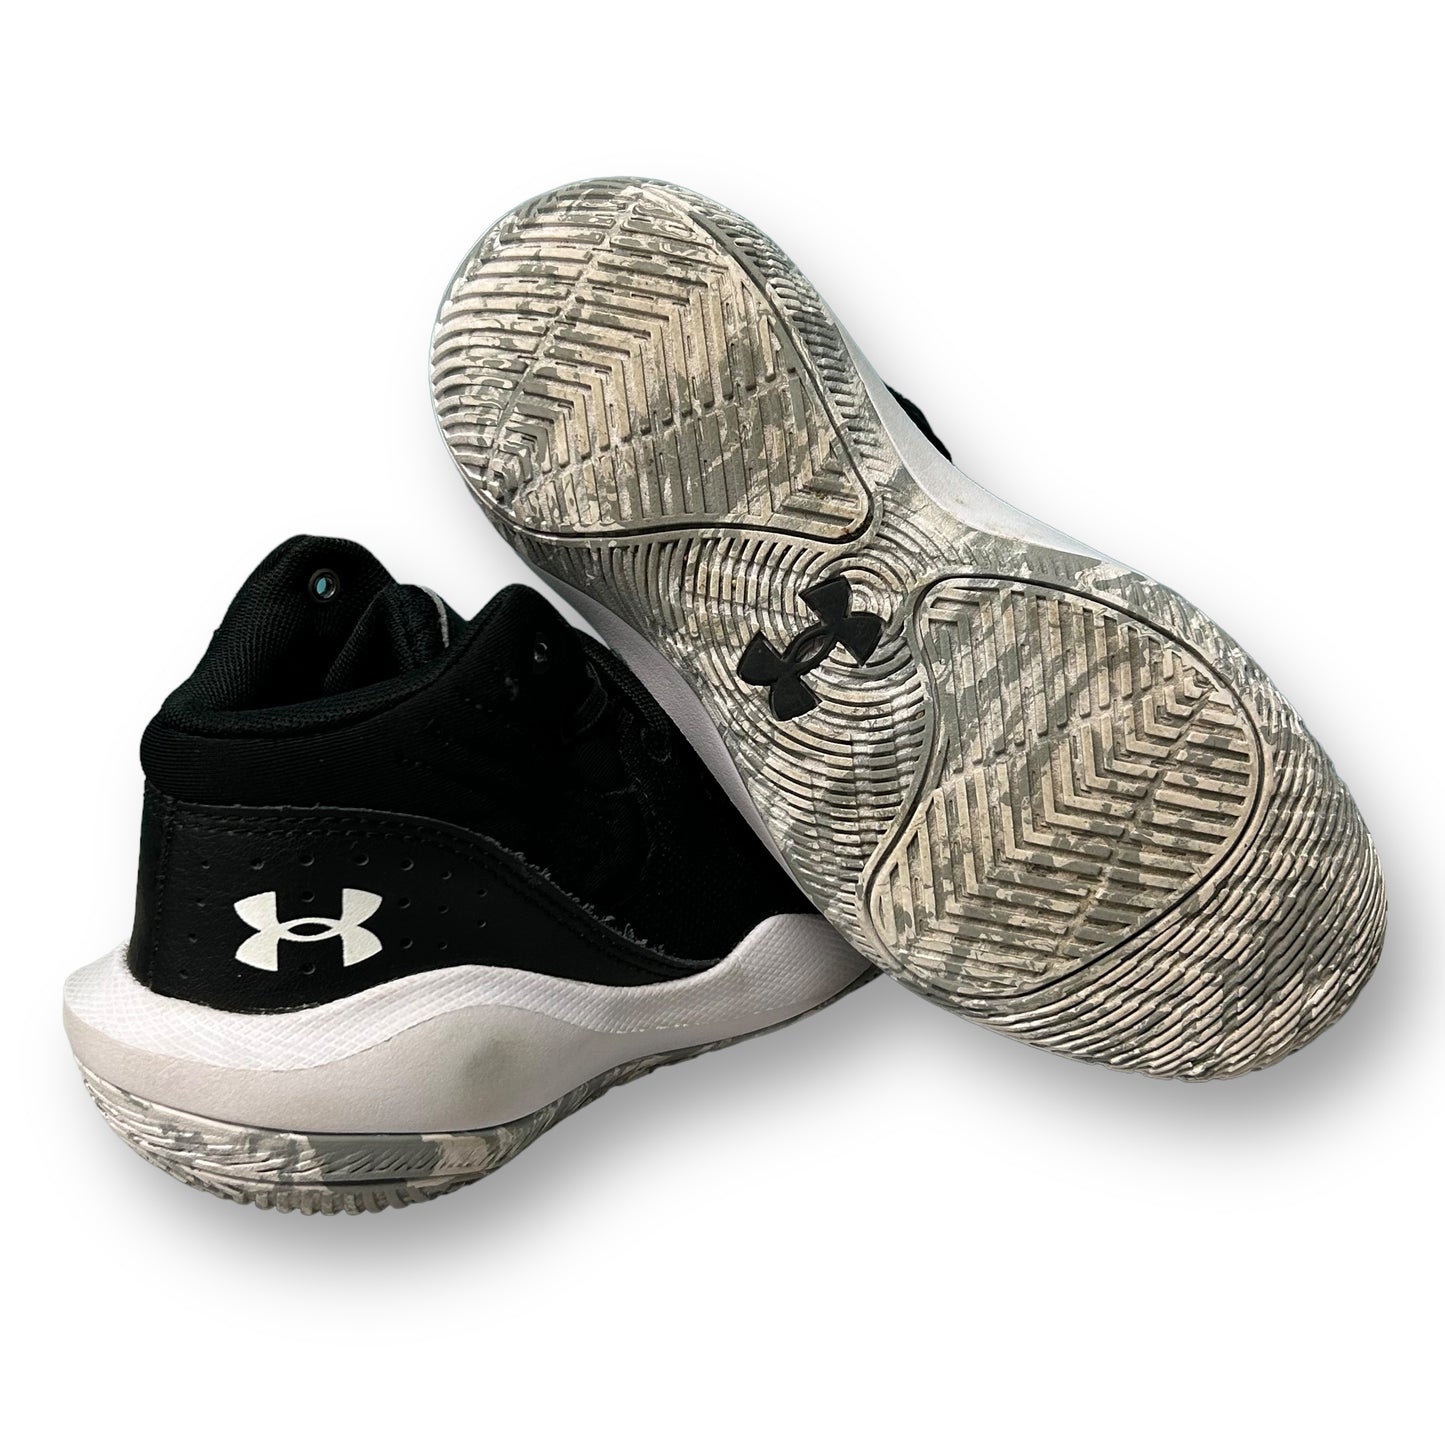 Under Armour Jet '21 Youth Boy Size 2.5Y Basketball Shoes